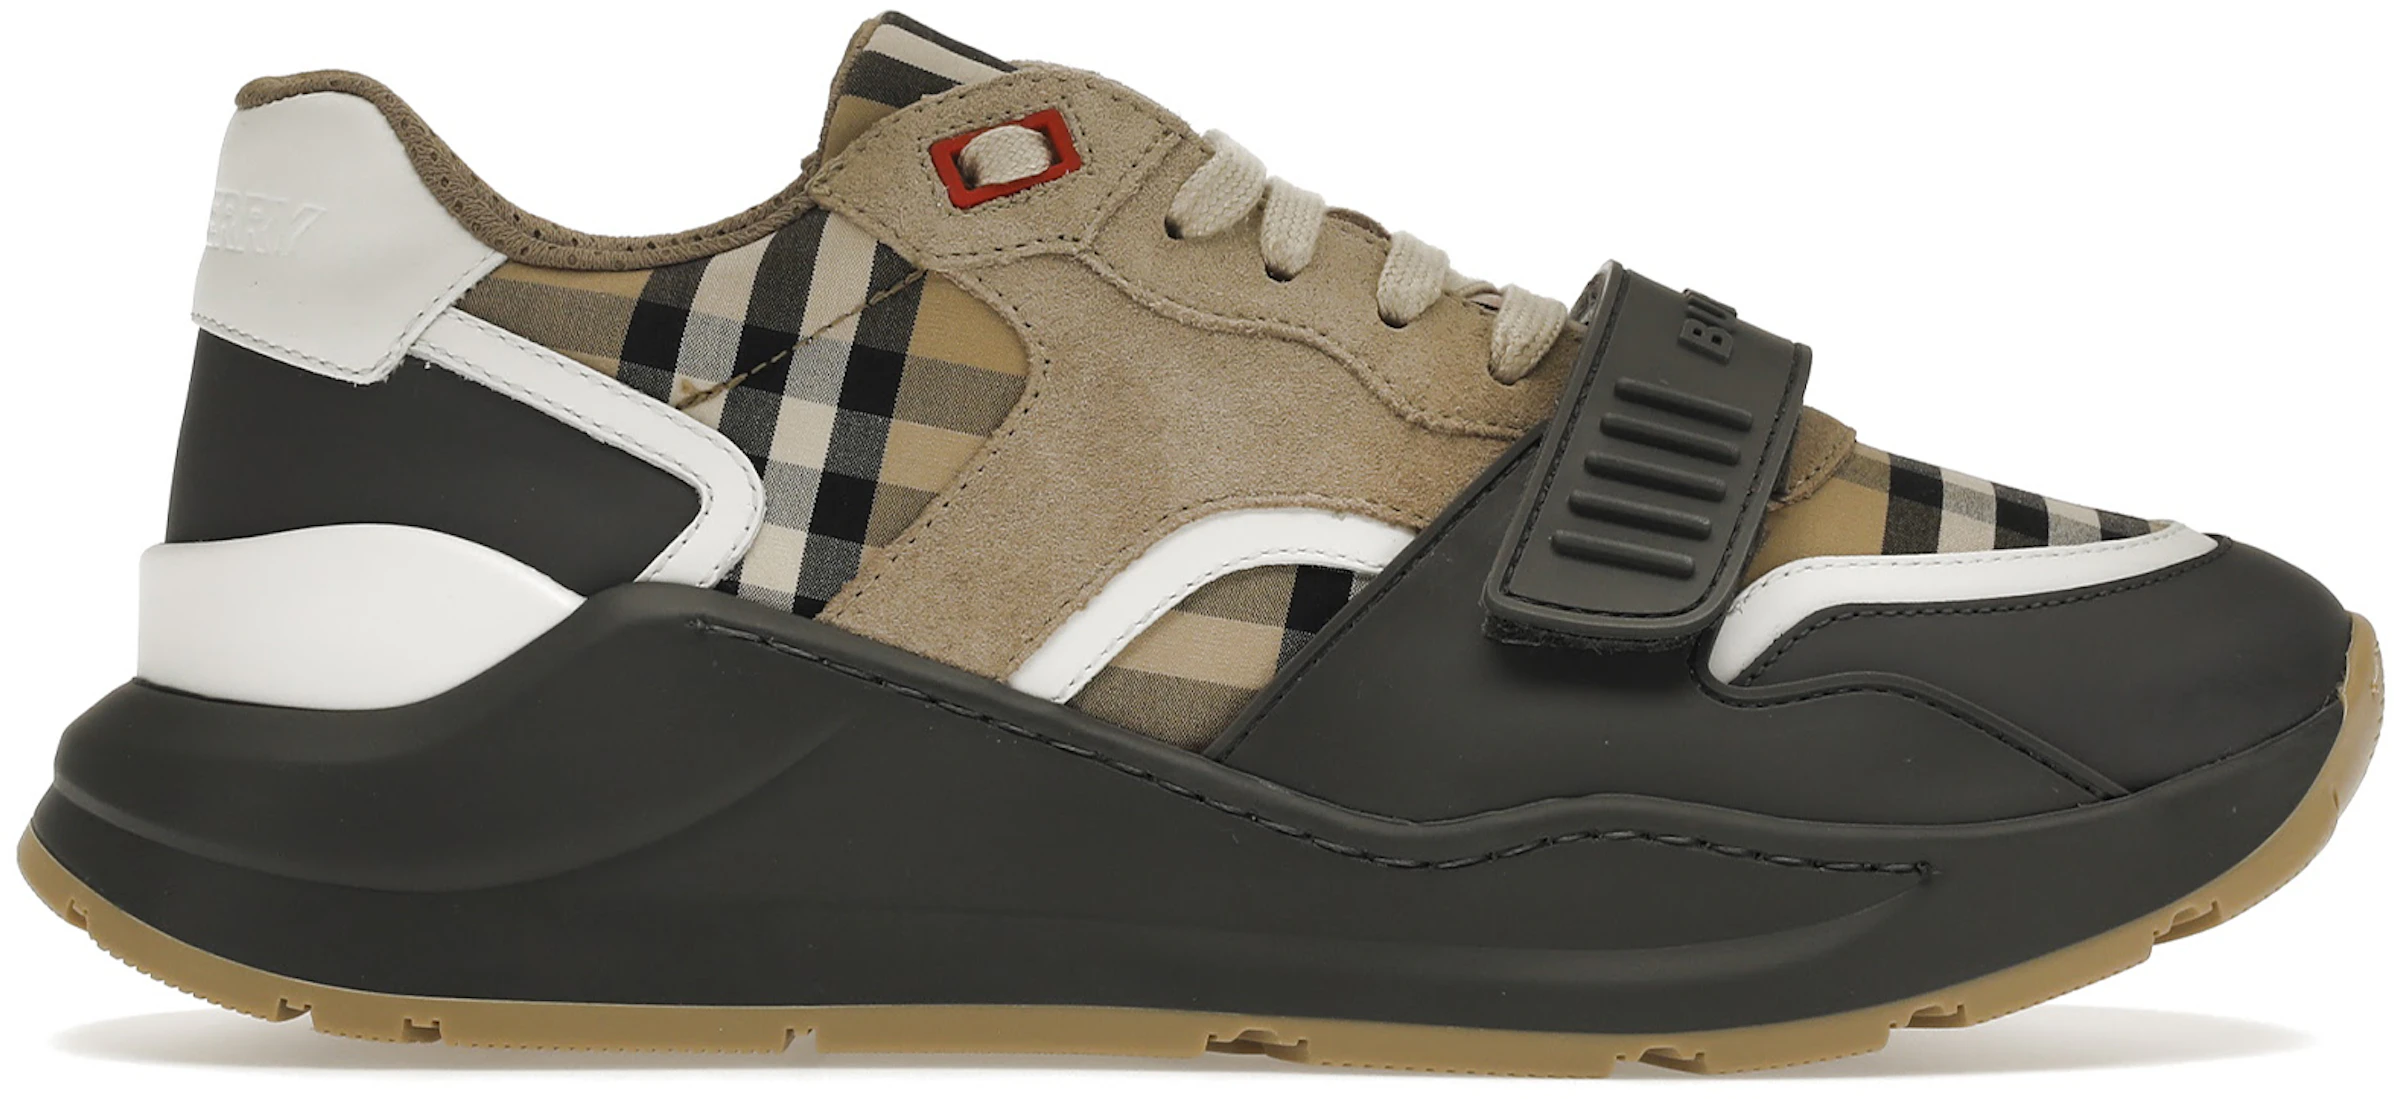 Burberry Ramsey Vintage Check Suede Leather Sneakers Grey Archive Beige -  80310981 - US